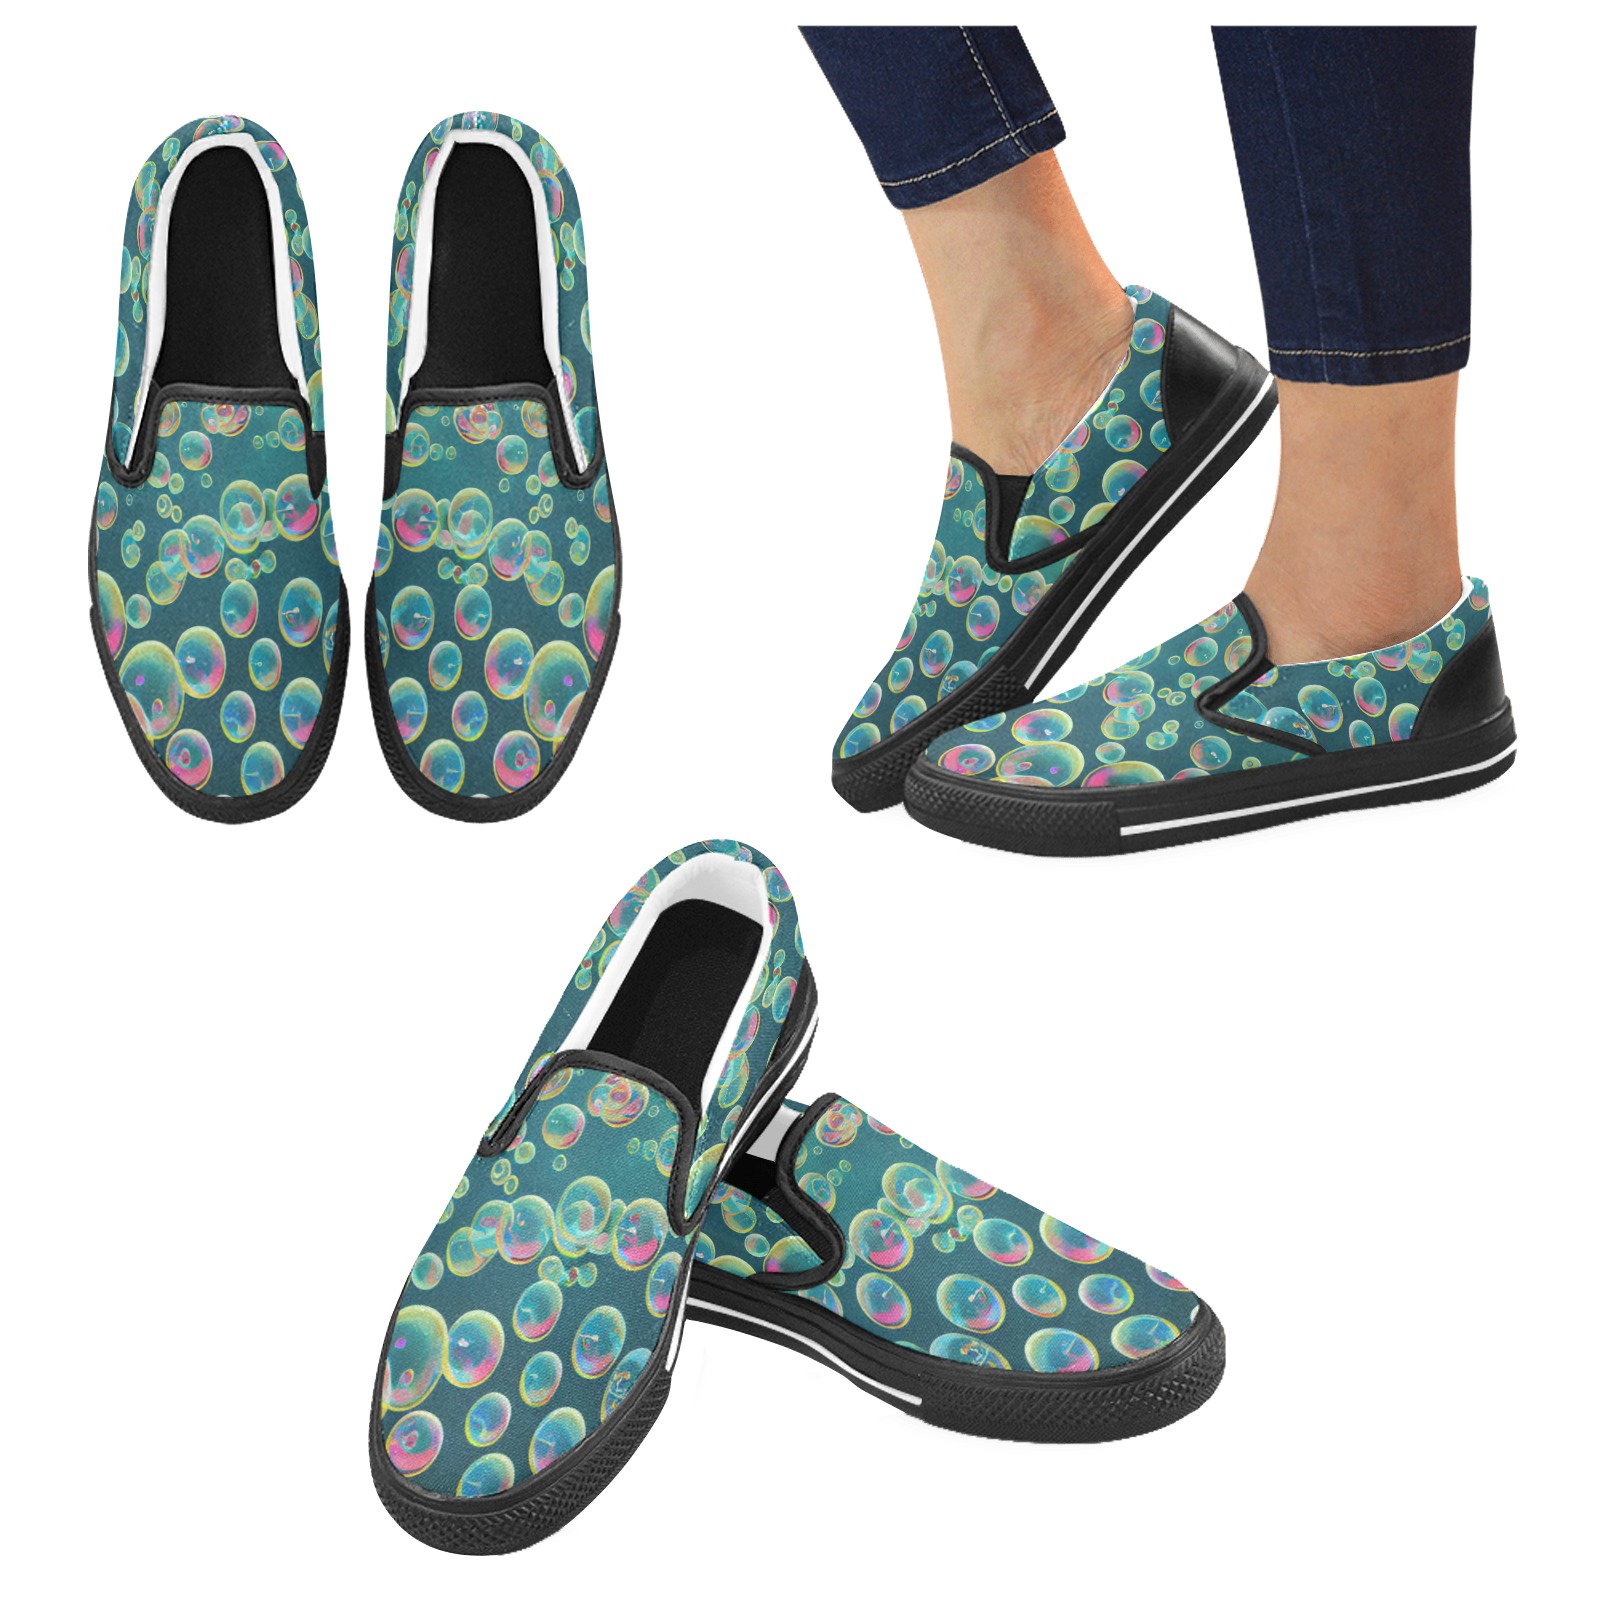 bubbles_pattern_6 b Slip-on Canvas Shoes for Kid (Model 019)